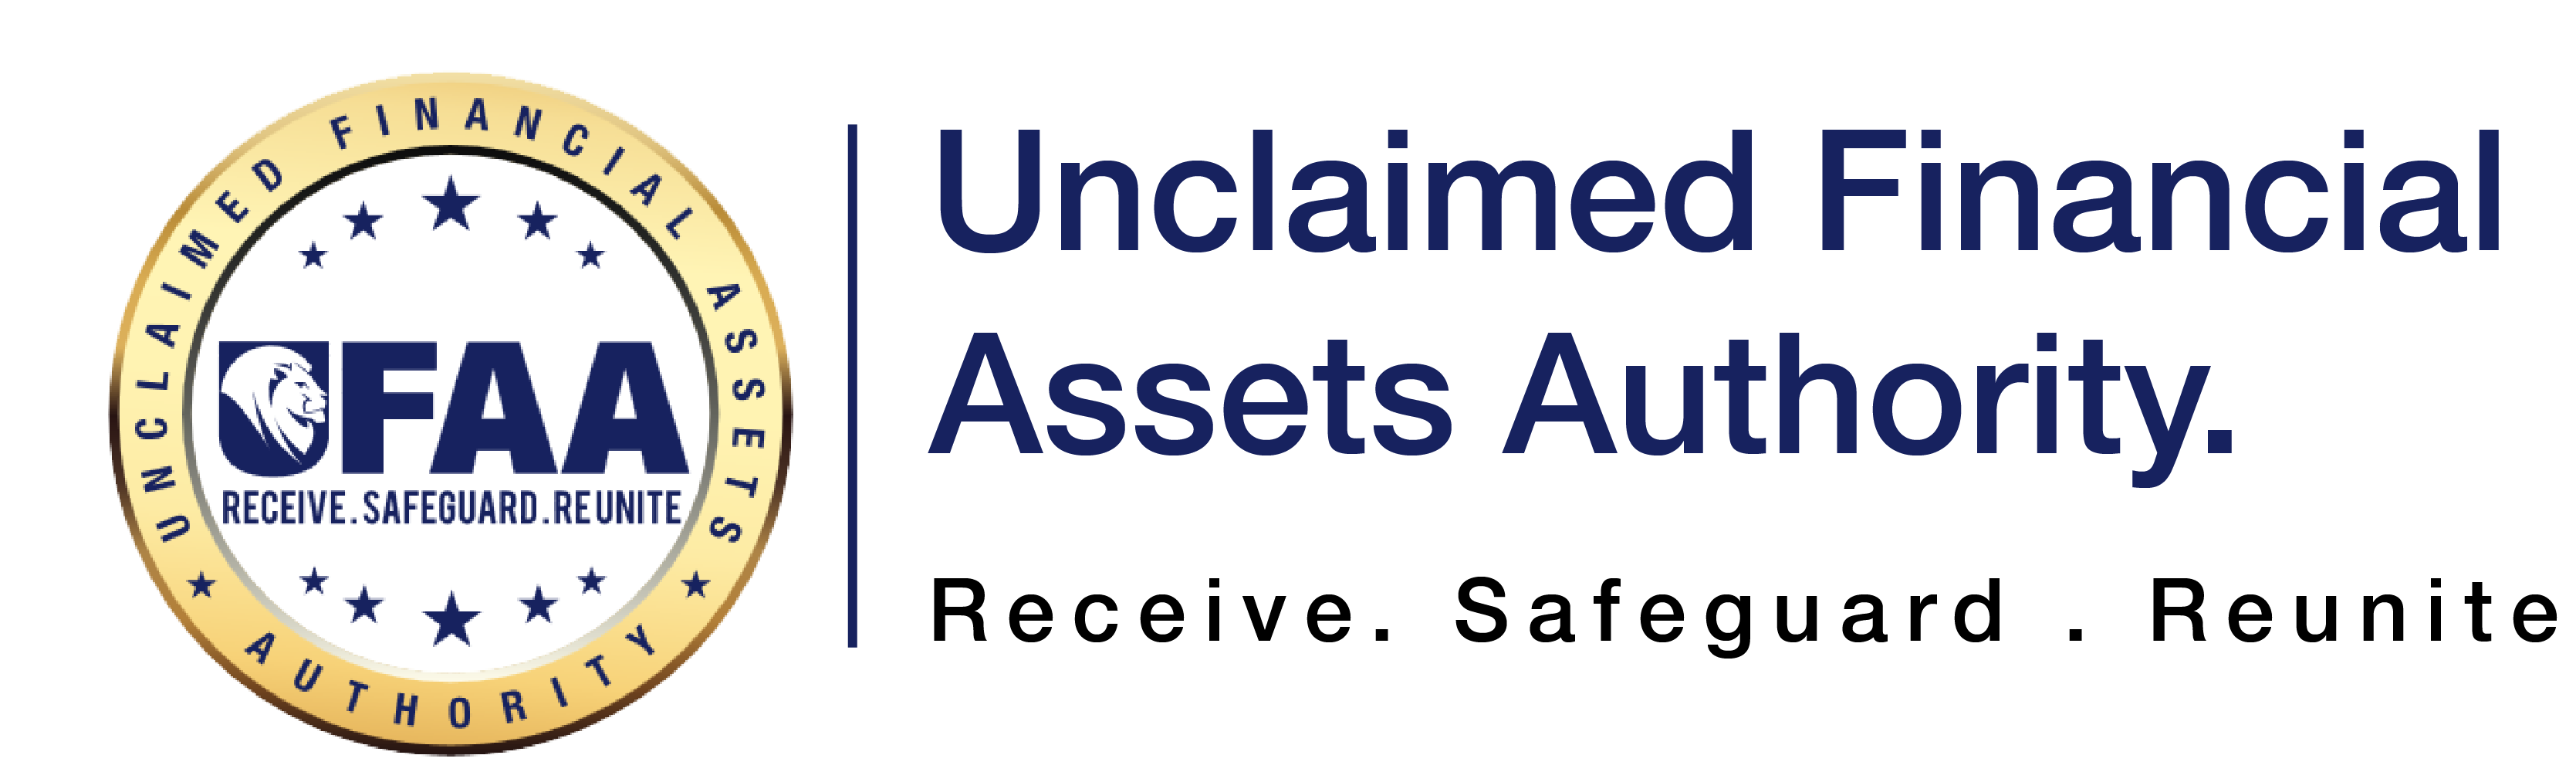 The Unclaimed Financial Assets Authority